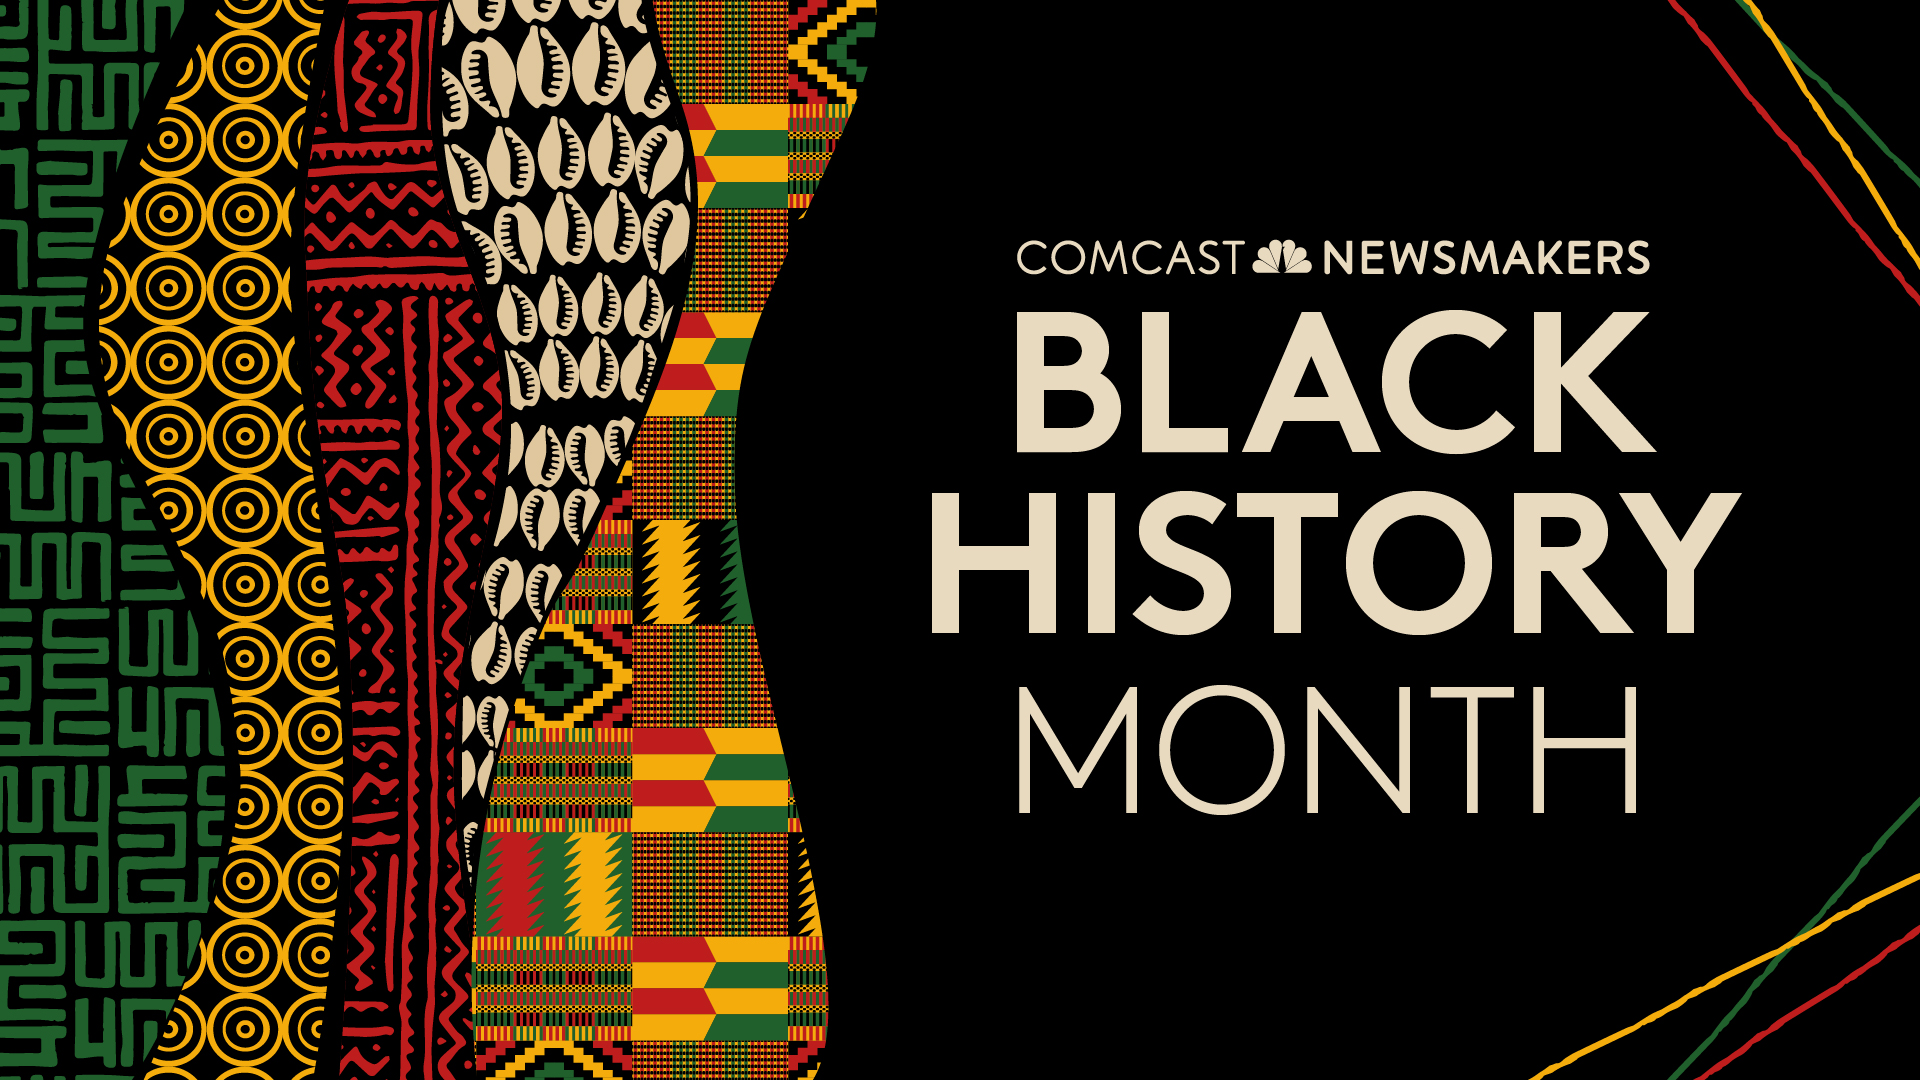 Comcast Newsmakers Black History Month